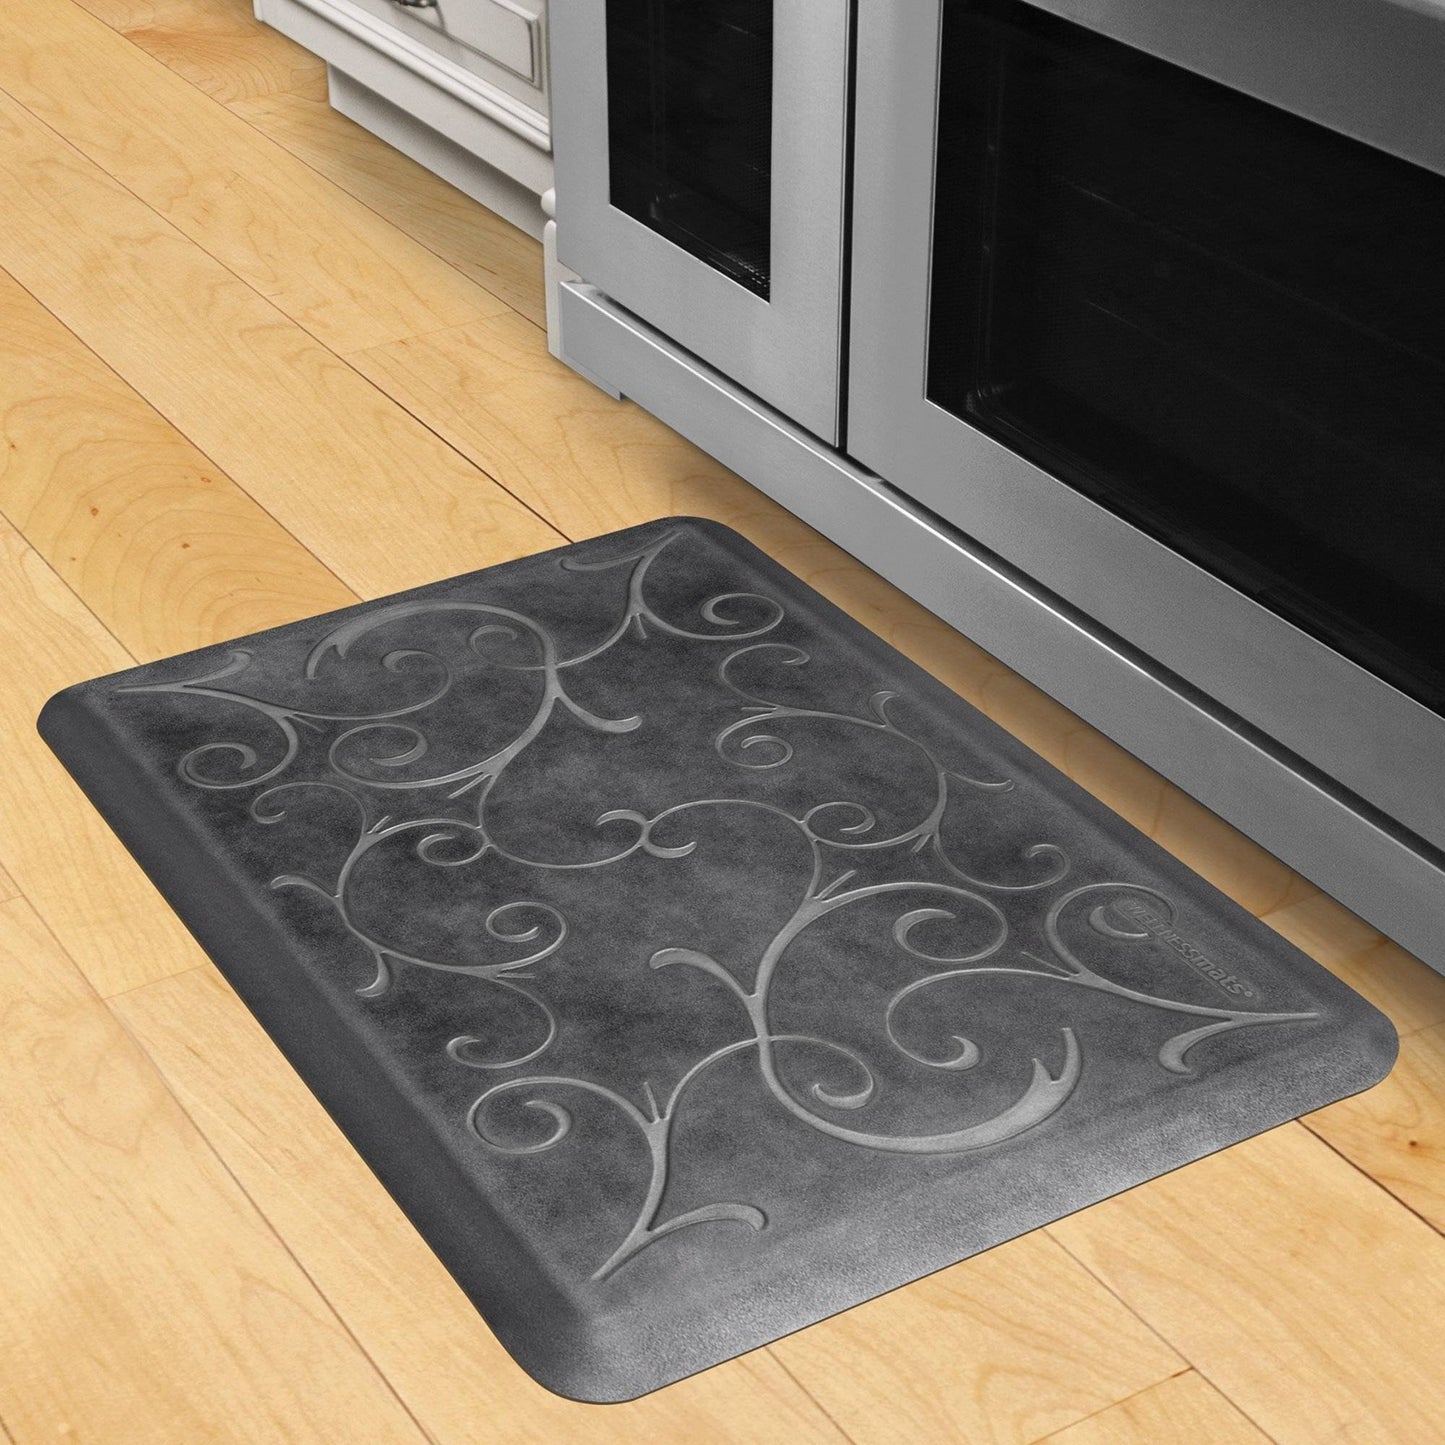 Wellnessmats Bella Estates Shades of Silver EB32WMRBNBLK,Onyx Kitchen floor mats that resist punctures, heat, dirt and stains. A floor mat that provides cushion and nonslip surface. 